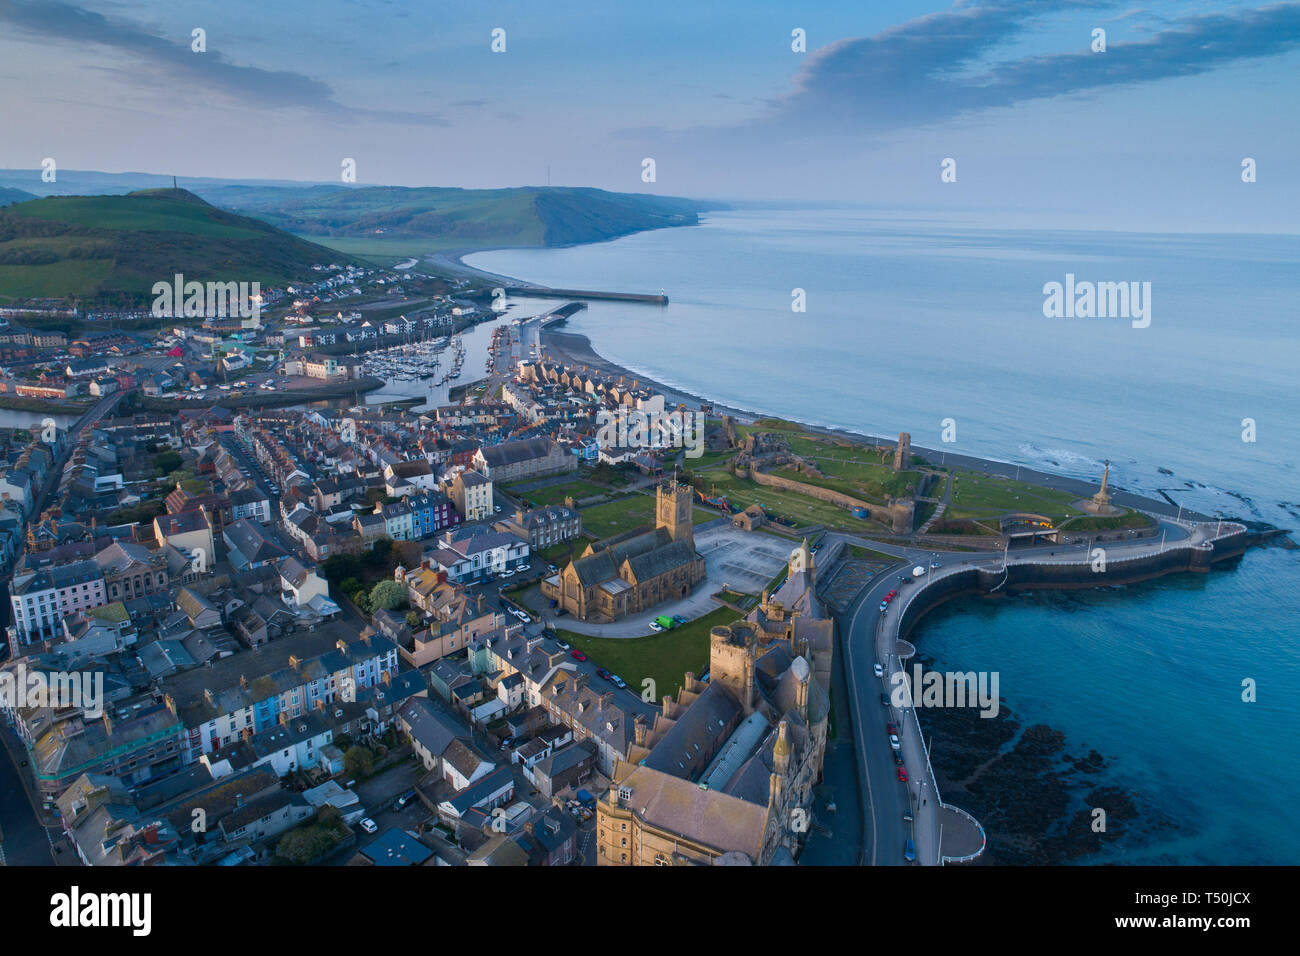 Aberystwyth Wales UK, Easter Saturday, 20 April 2019. UK Weather: Daybreak over the seaside and university town of Aberystwyth on the west wales coast, at the start of Easter Saturday 2019. The weather is again set to be hot and sunny, with temperatures in the low 20's Celsius (low 70's Fahrenheit). Credit: keith morris/Alamy Live News Stock Photo